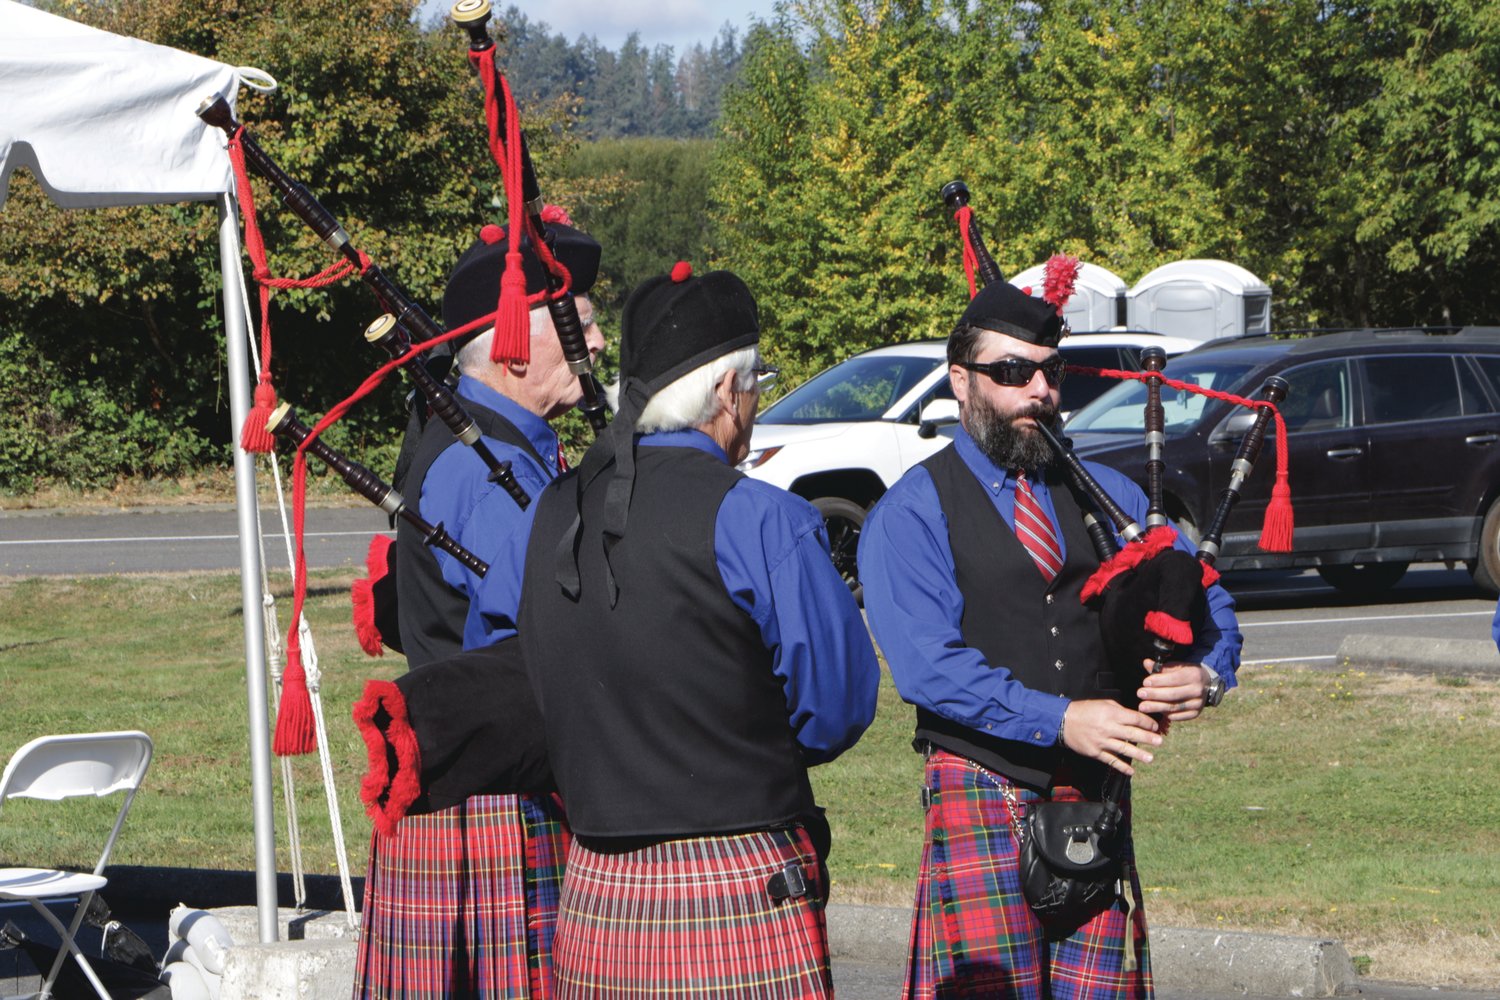 The Olympia Highlanders group performs a song on the bagpipes during the Nisqually Watershed Festival on Sept. 24.